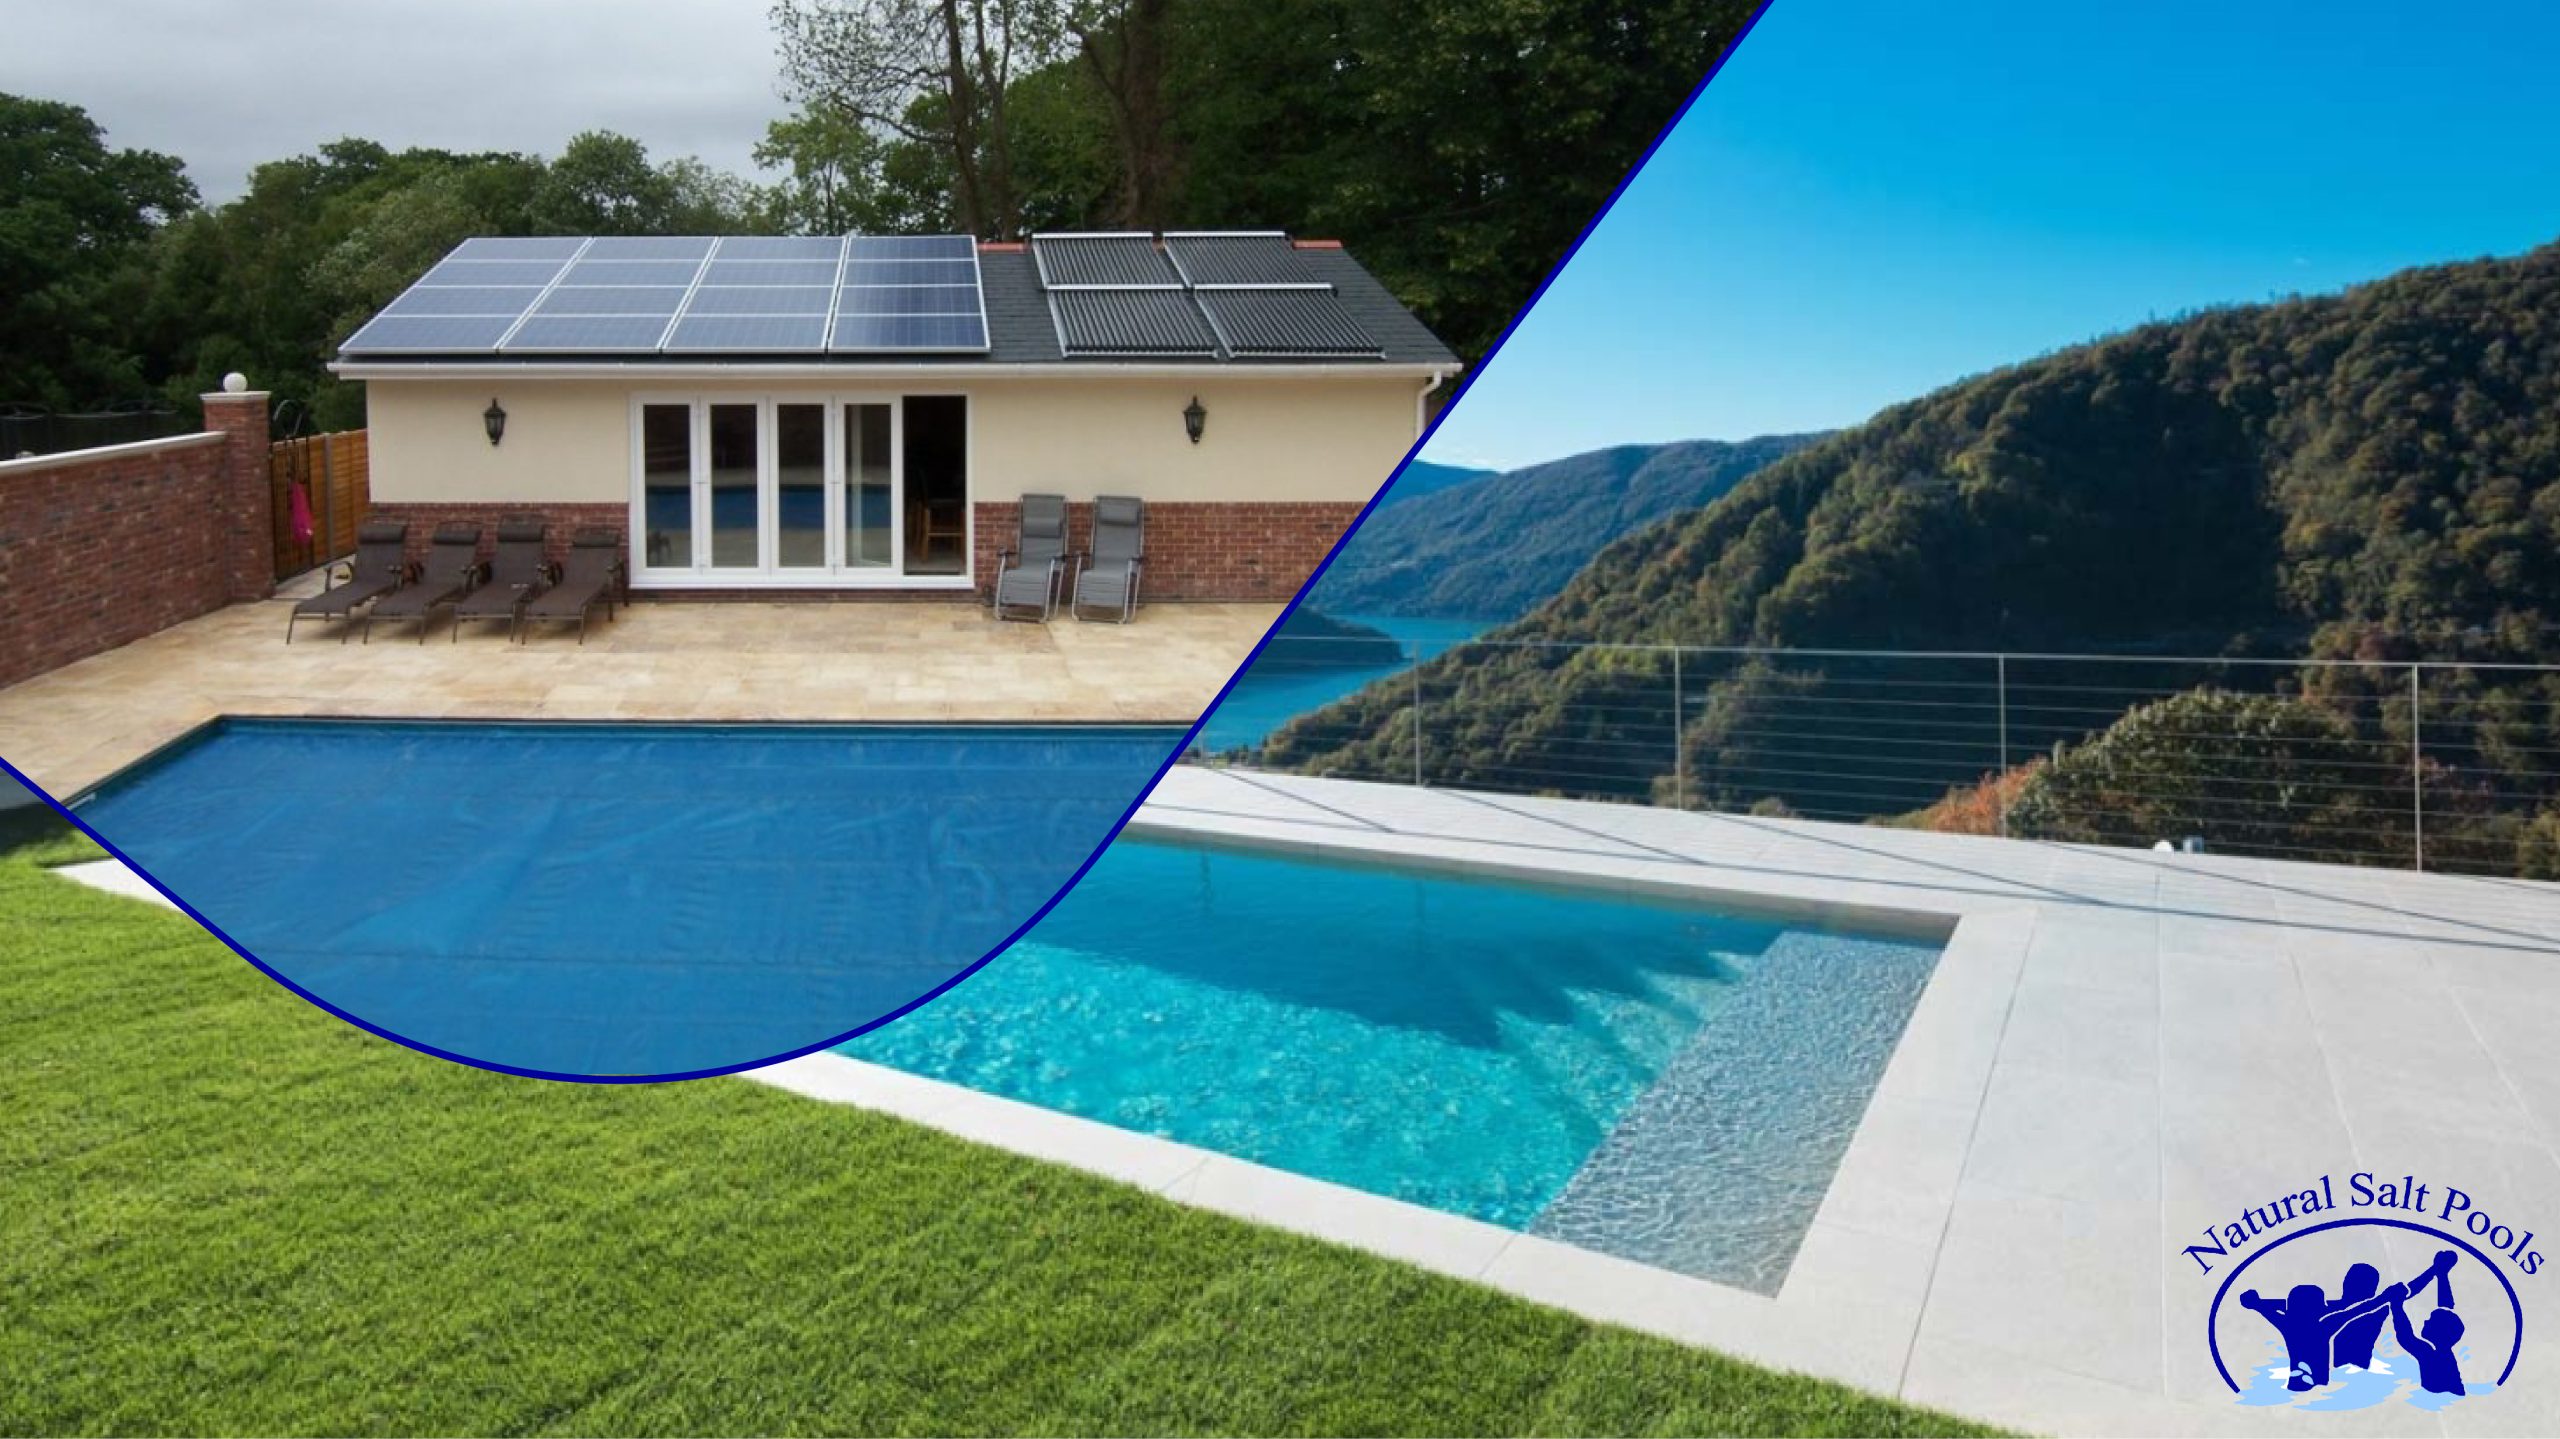 solar-panels-at-roof-tops-for-heating-outdoor-pools